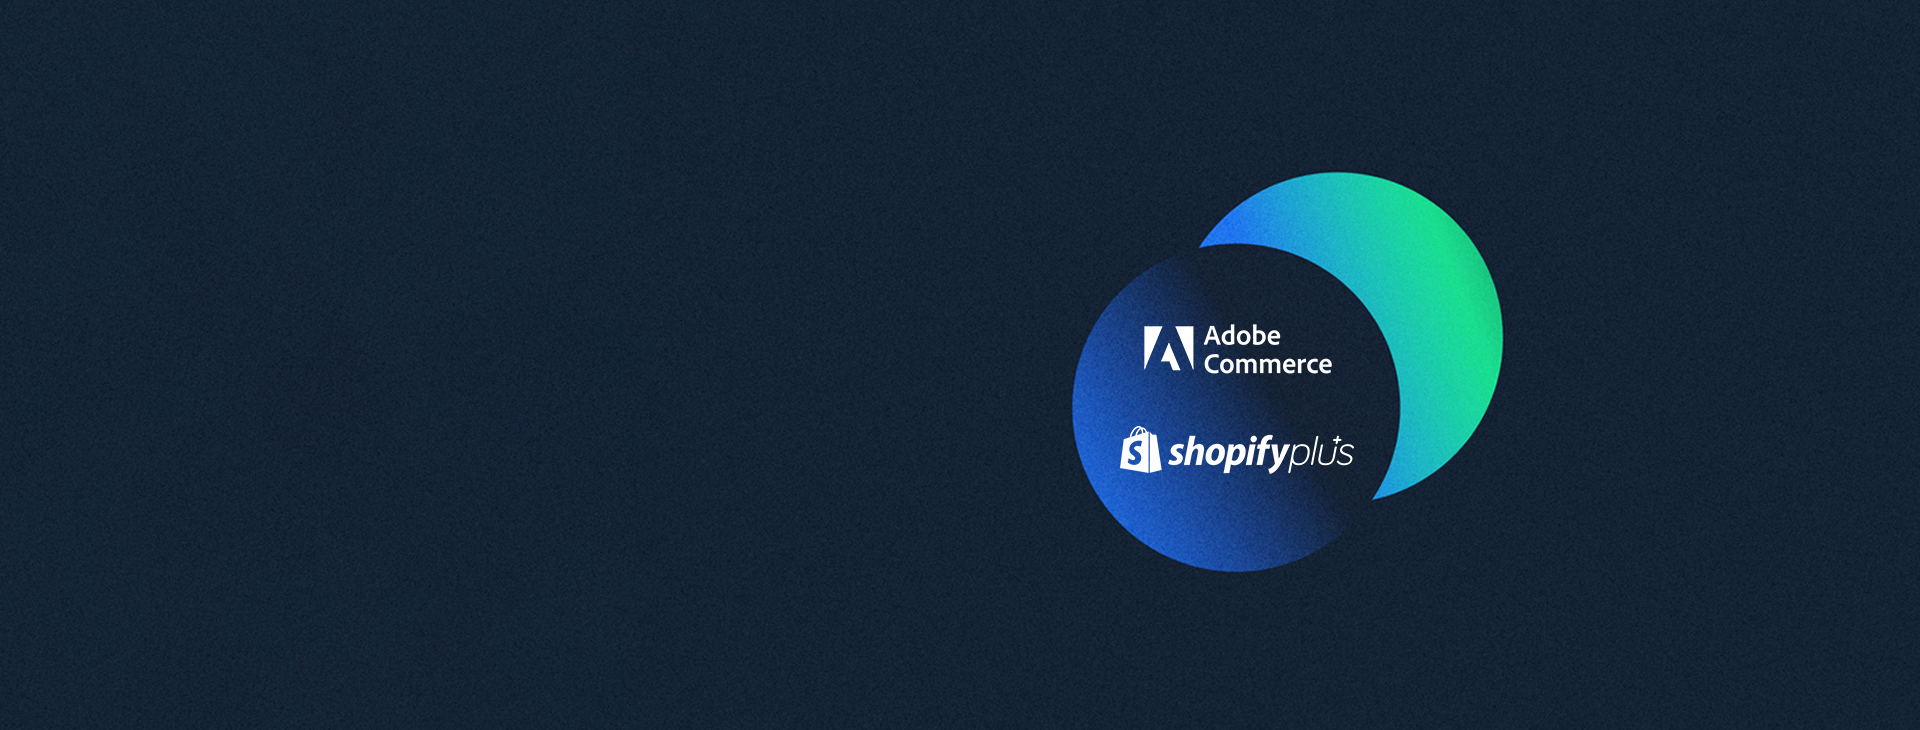 Abstract image depicting Adobe and Shopify Plus logos